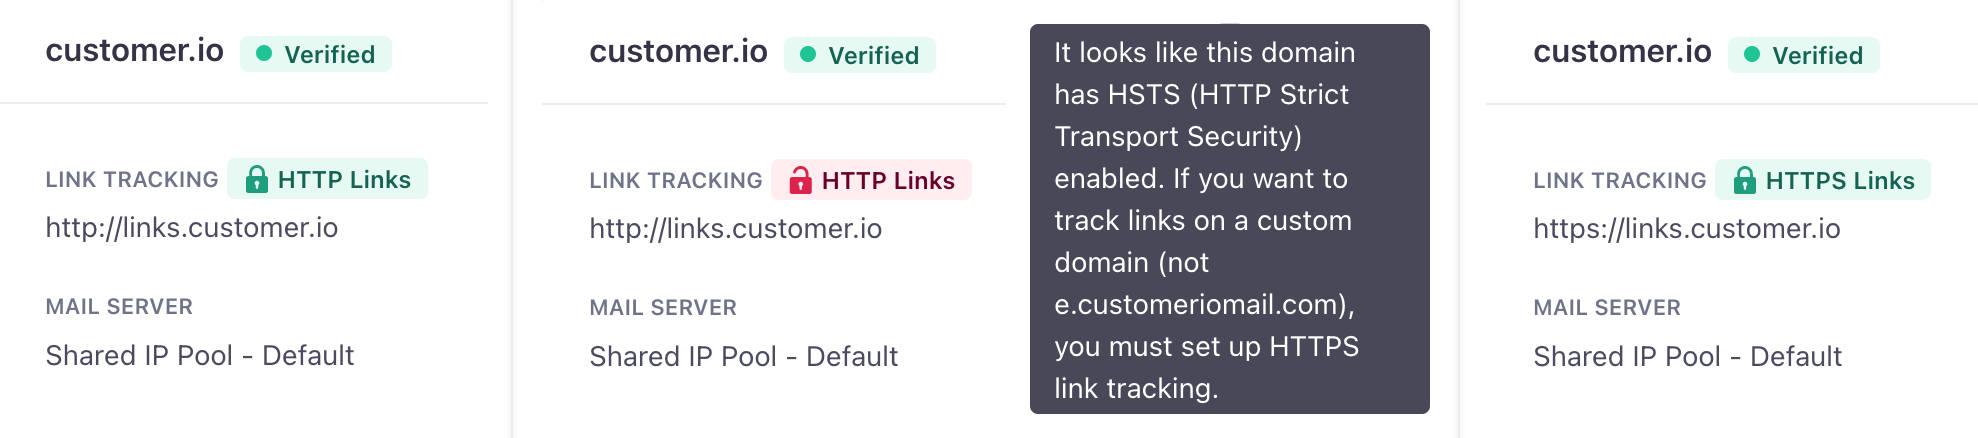 HTTP, HTTP with HSTS errors, and HTTPS status for tracked links.